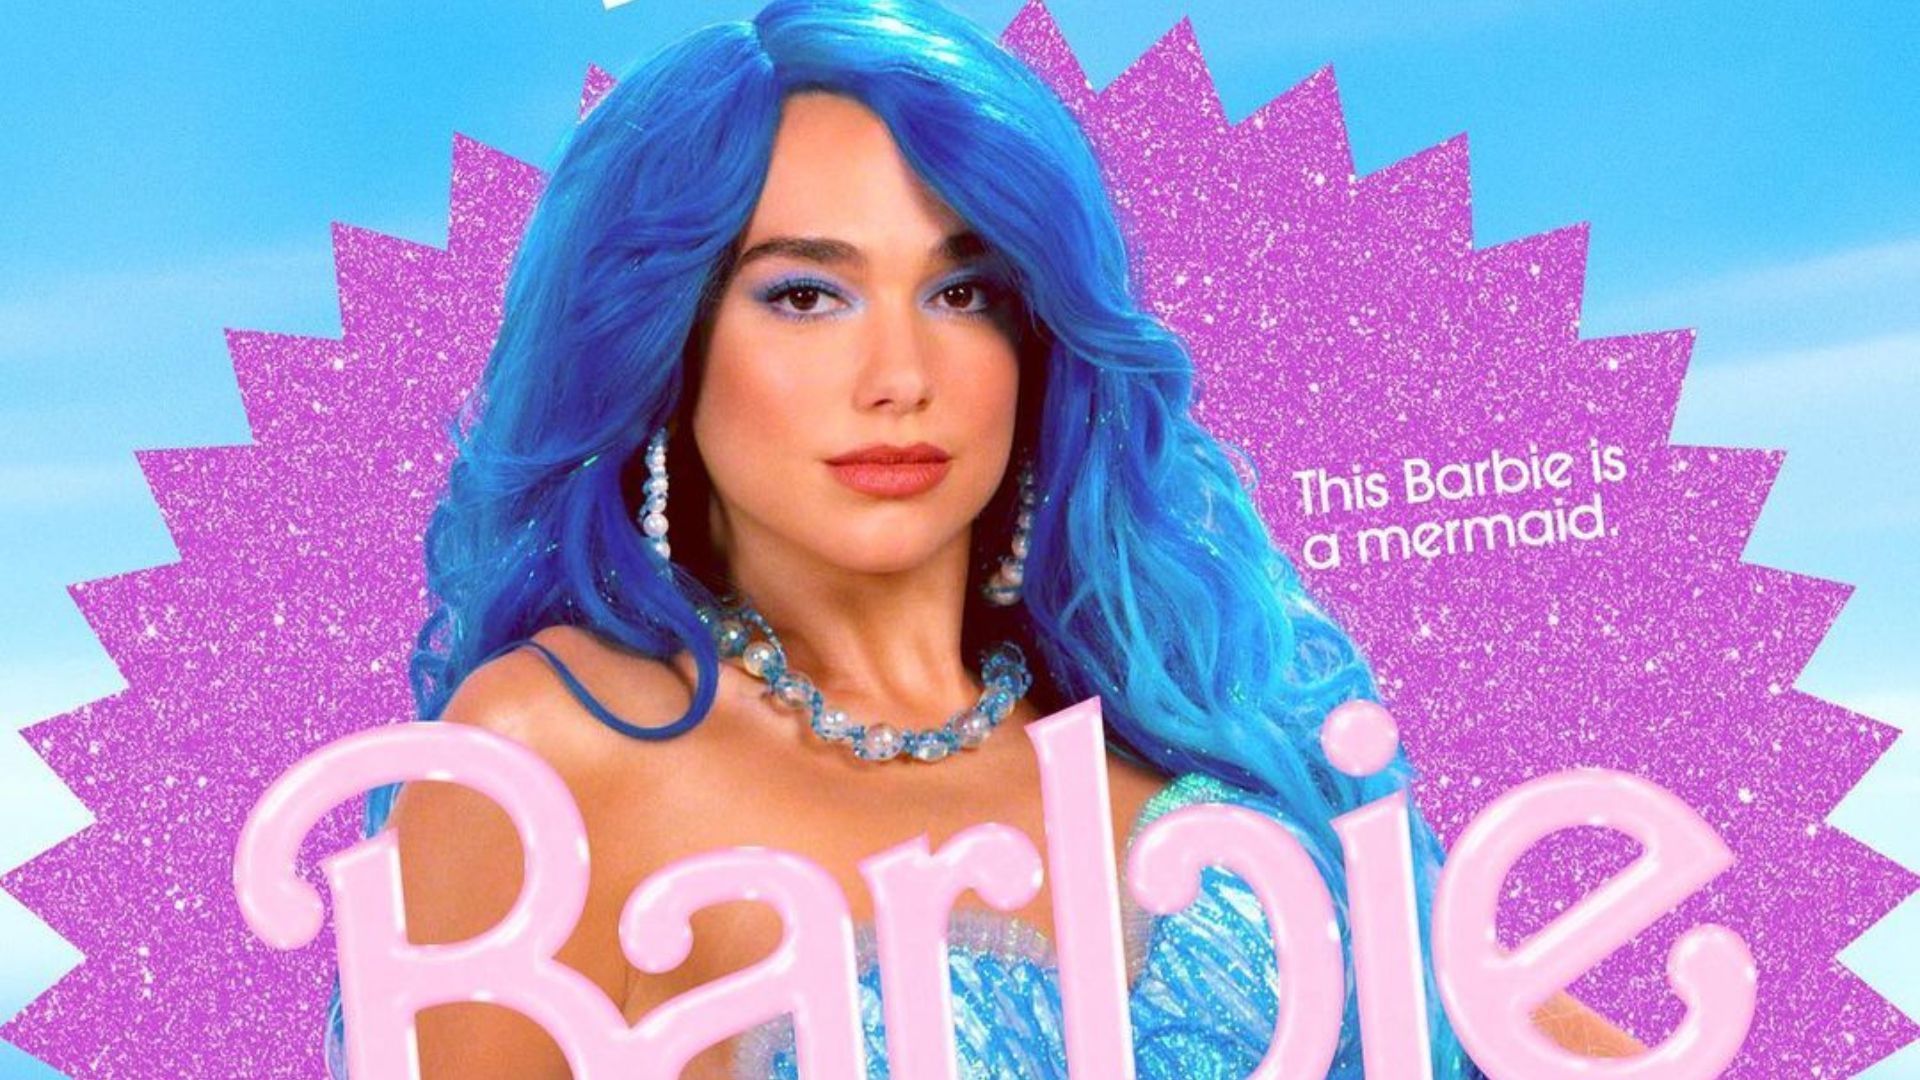 barbie character based on zodiac sign